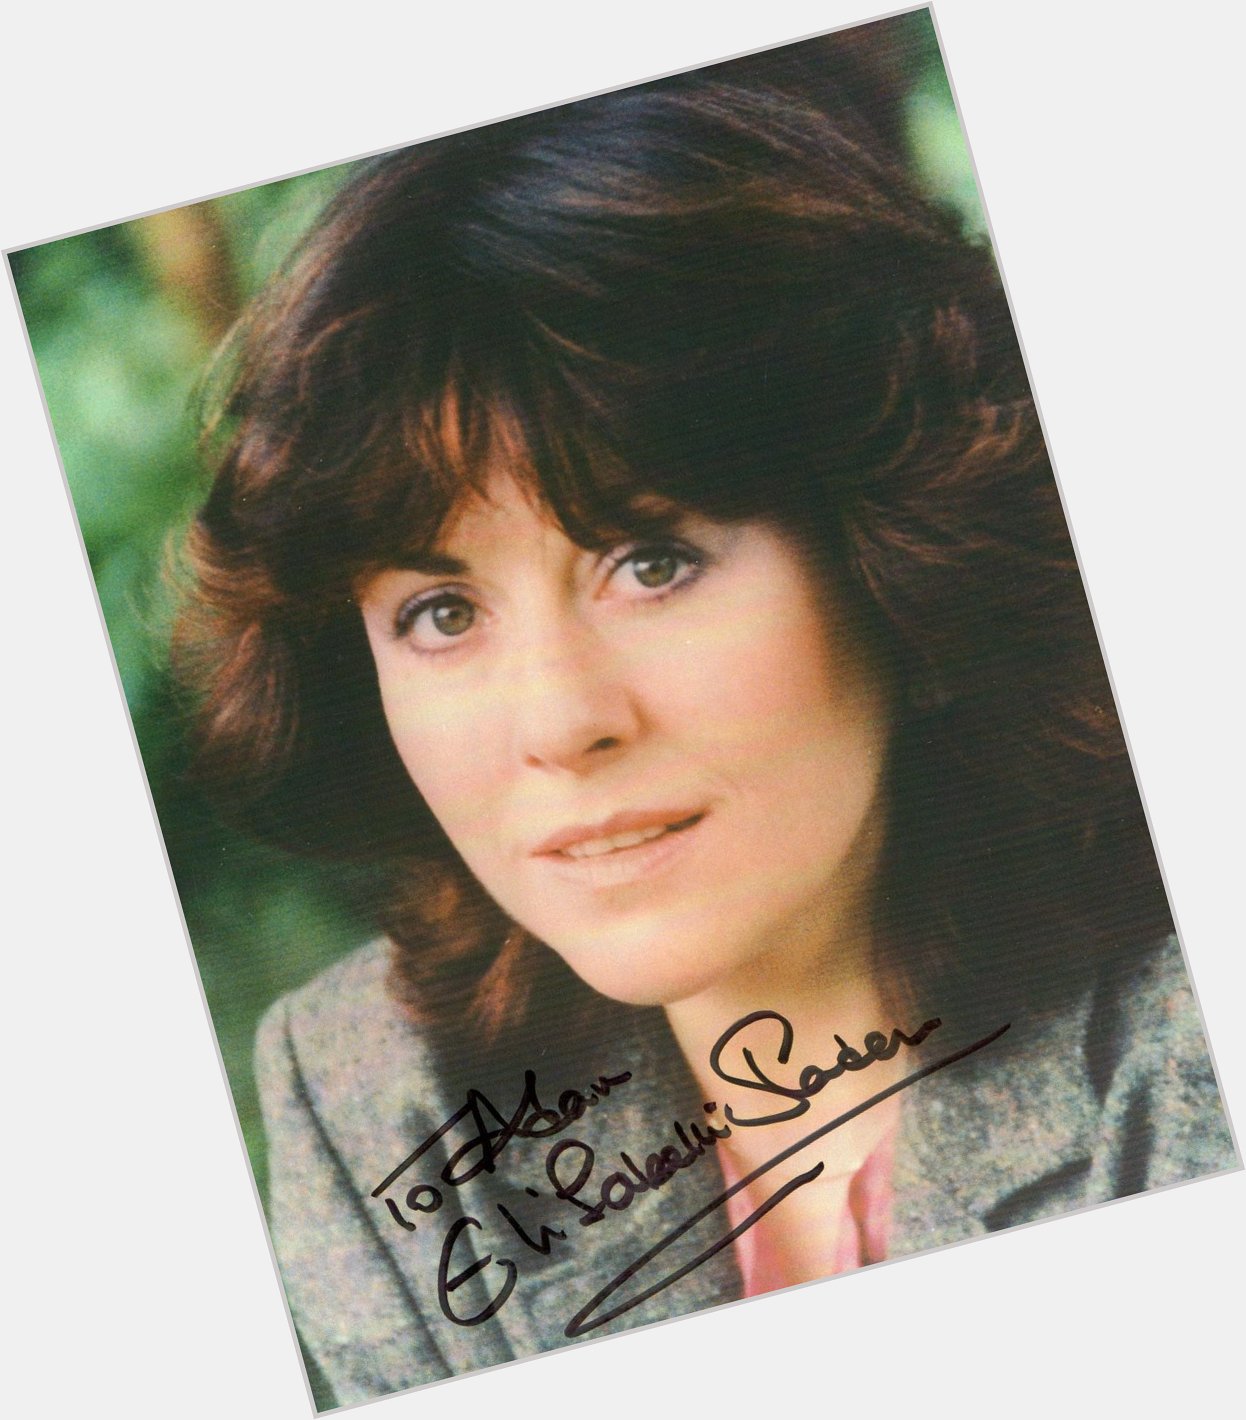 Elisabeth Sladen was born on this day in 1946. Greatly missed but never forgotten. Happy Birthday Sarah Jane! 